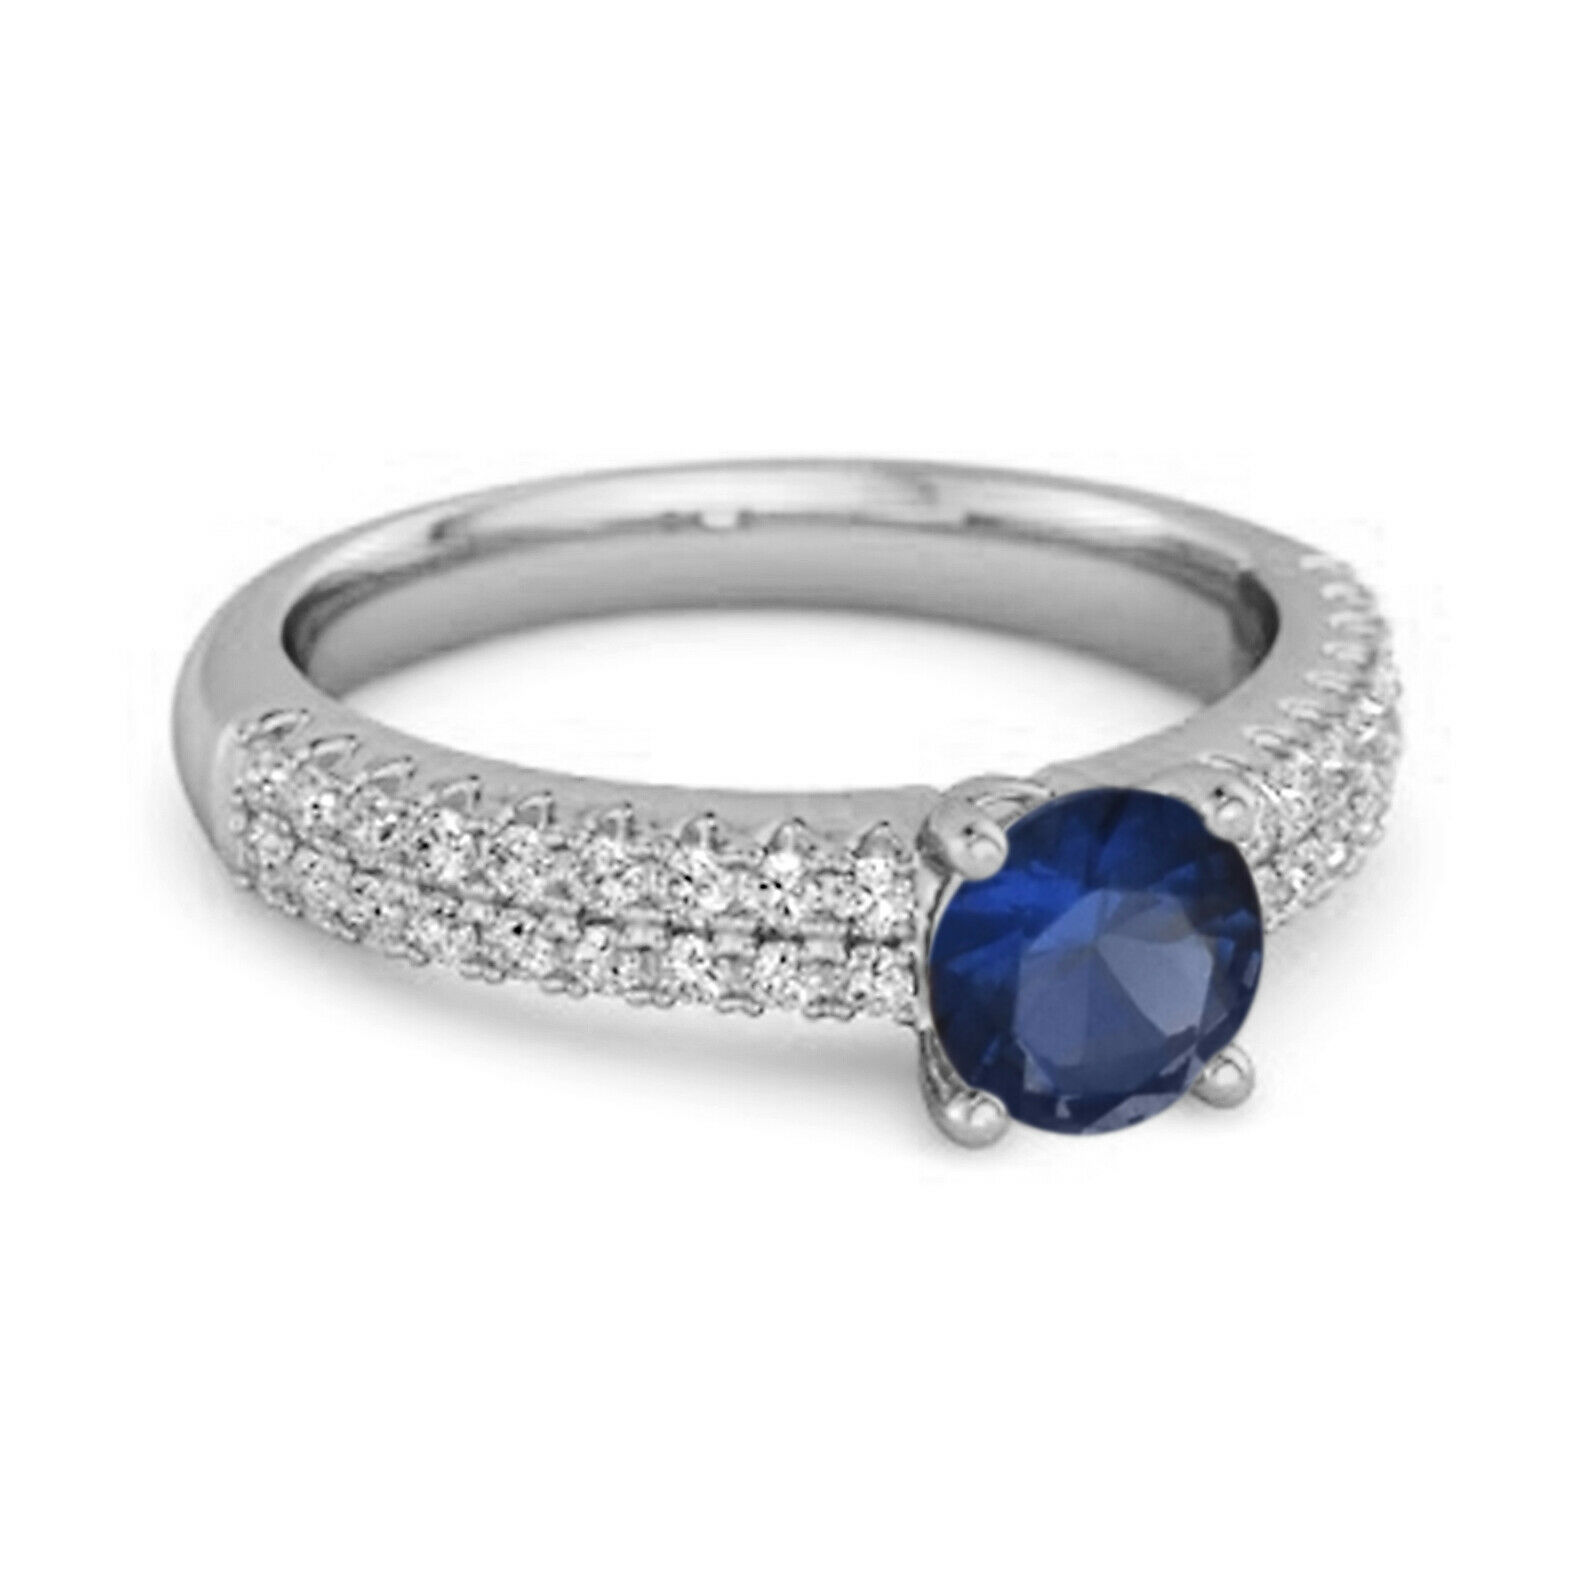 Dual Band 0.10 Ctw Blue Sapphire 9k White Gold Stacking Ring